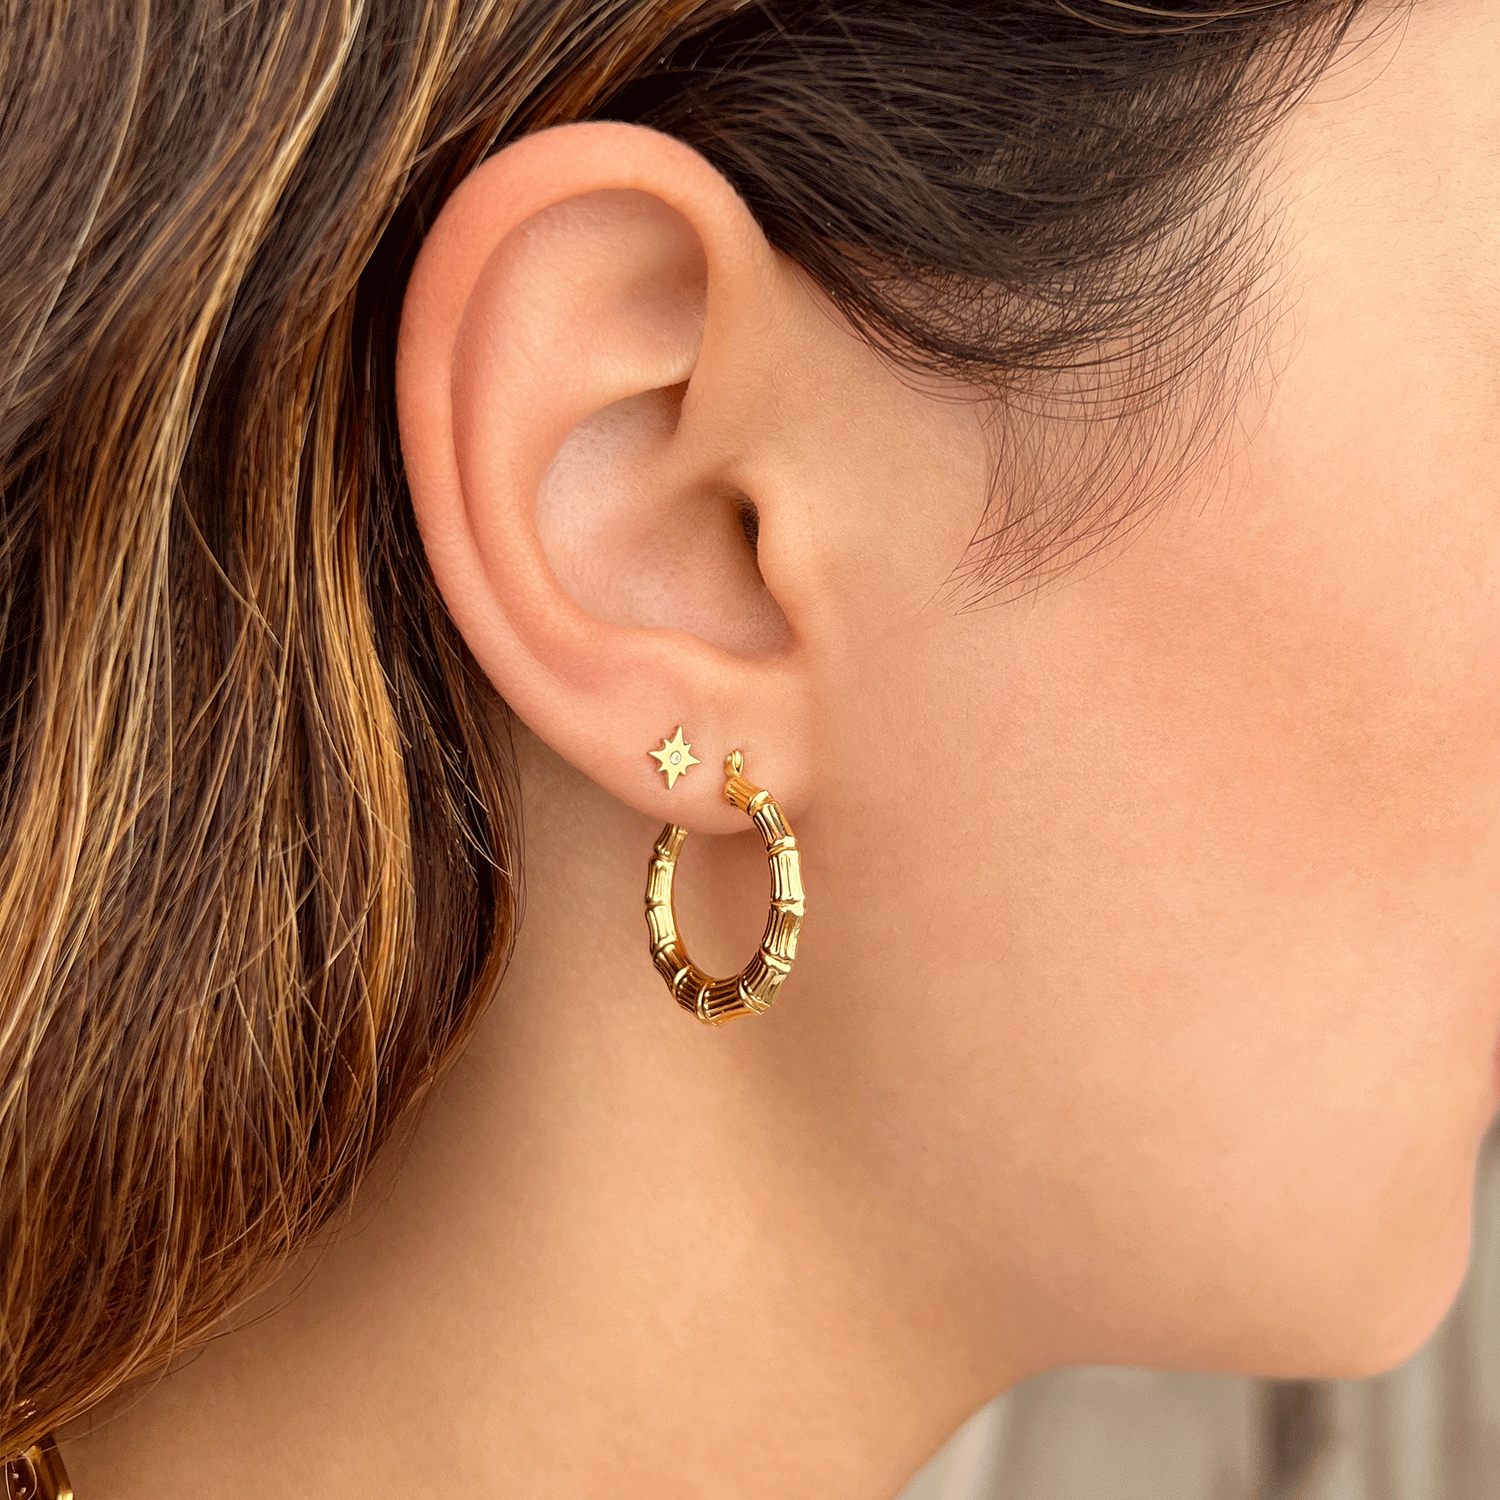 Bamboo Hoop Earrings by Baby Gold - Shop Custom Gold Jewelry